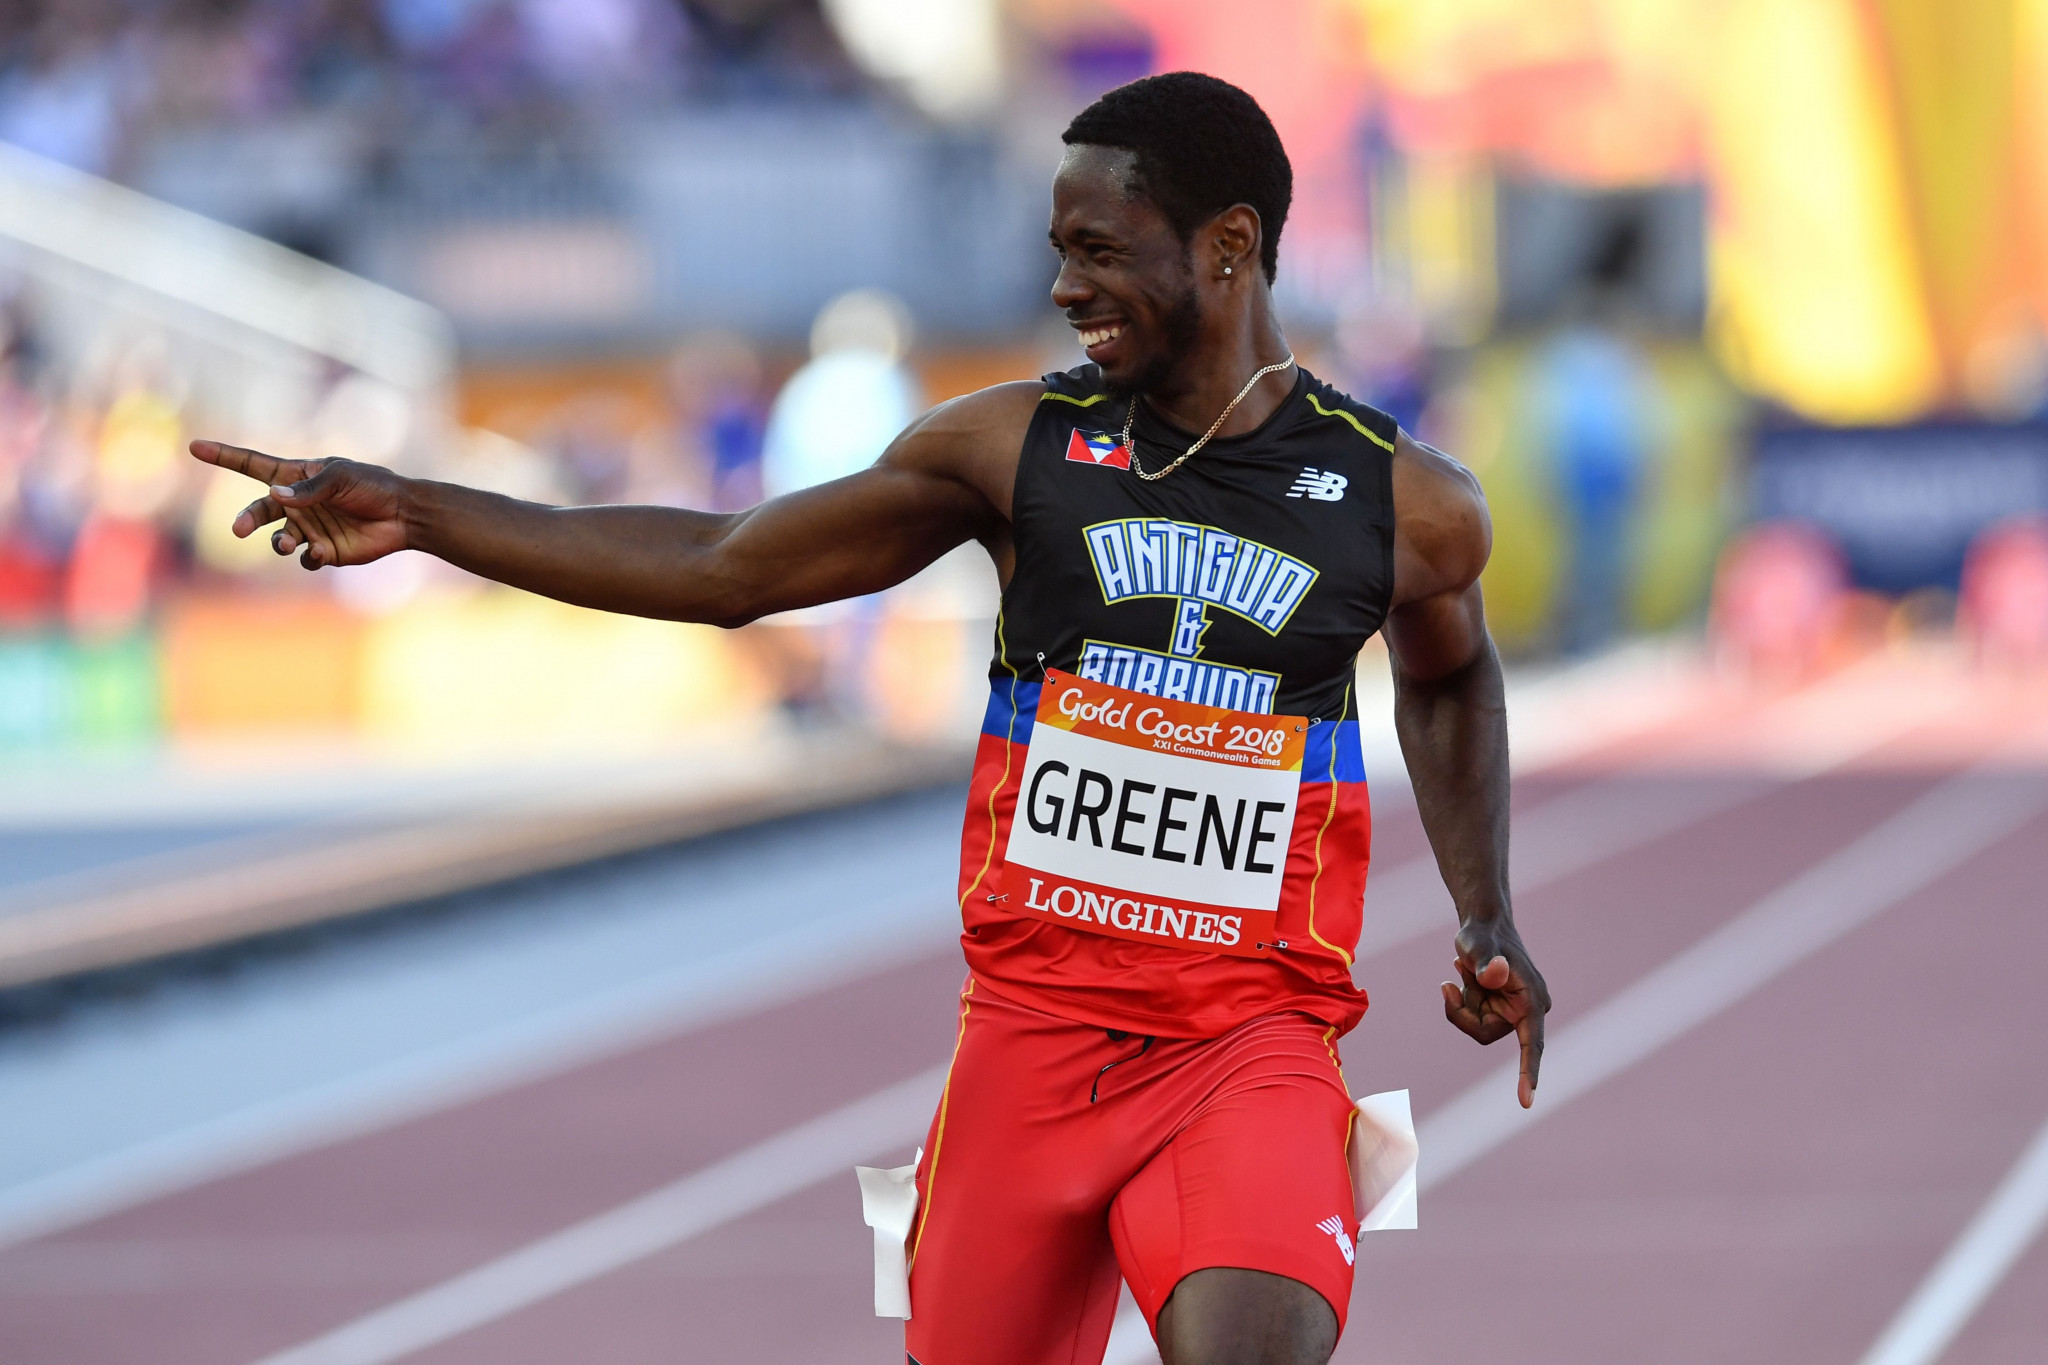 Antigua and Barbuda has never won a medal at the Commonwealth Games, but sprinter Cejhae Greene is a hope for Birmingham ©Getty Images